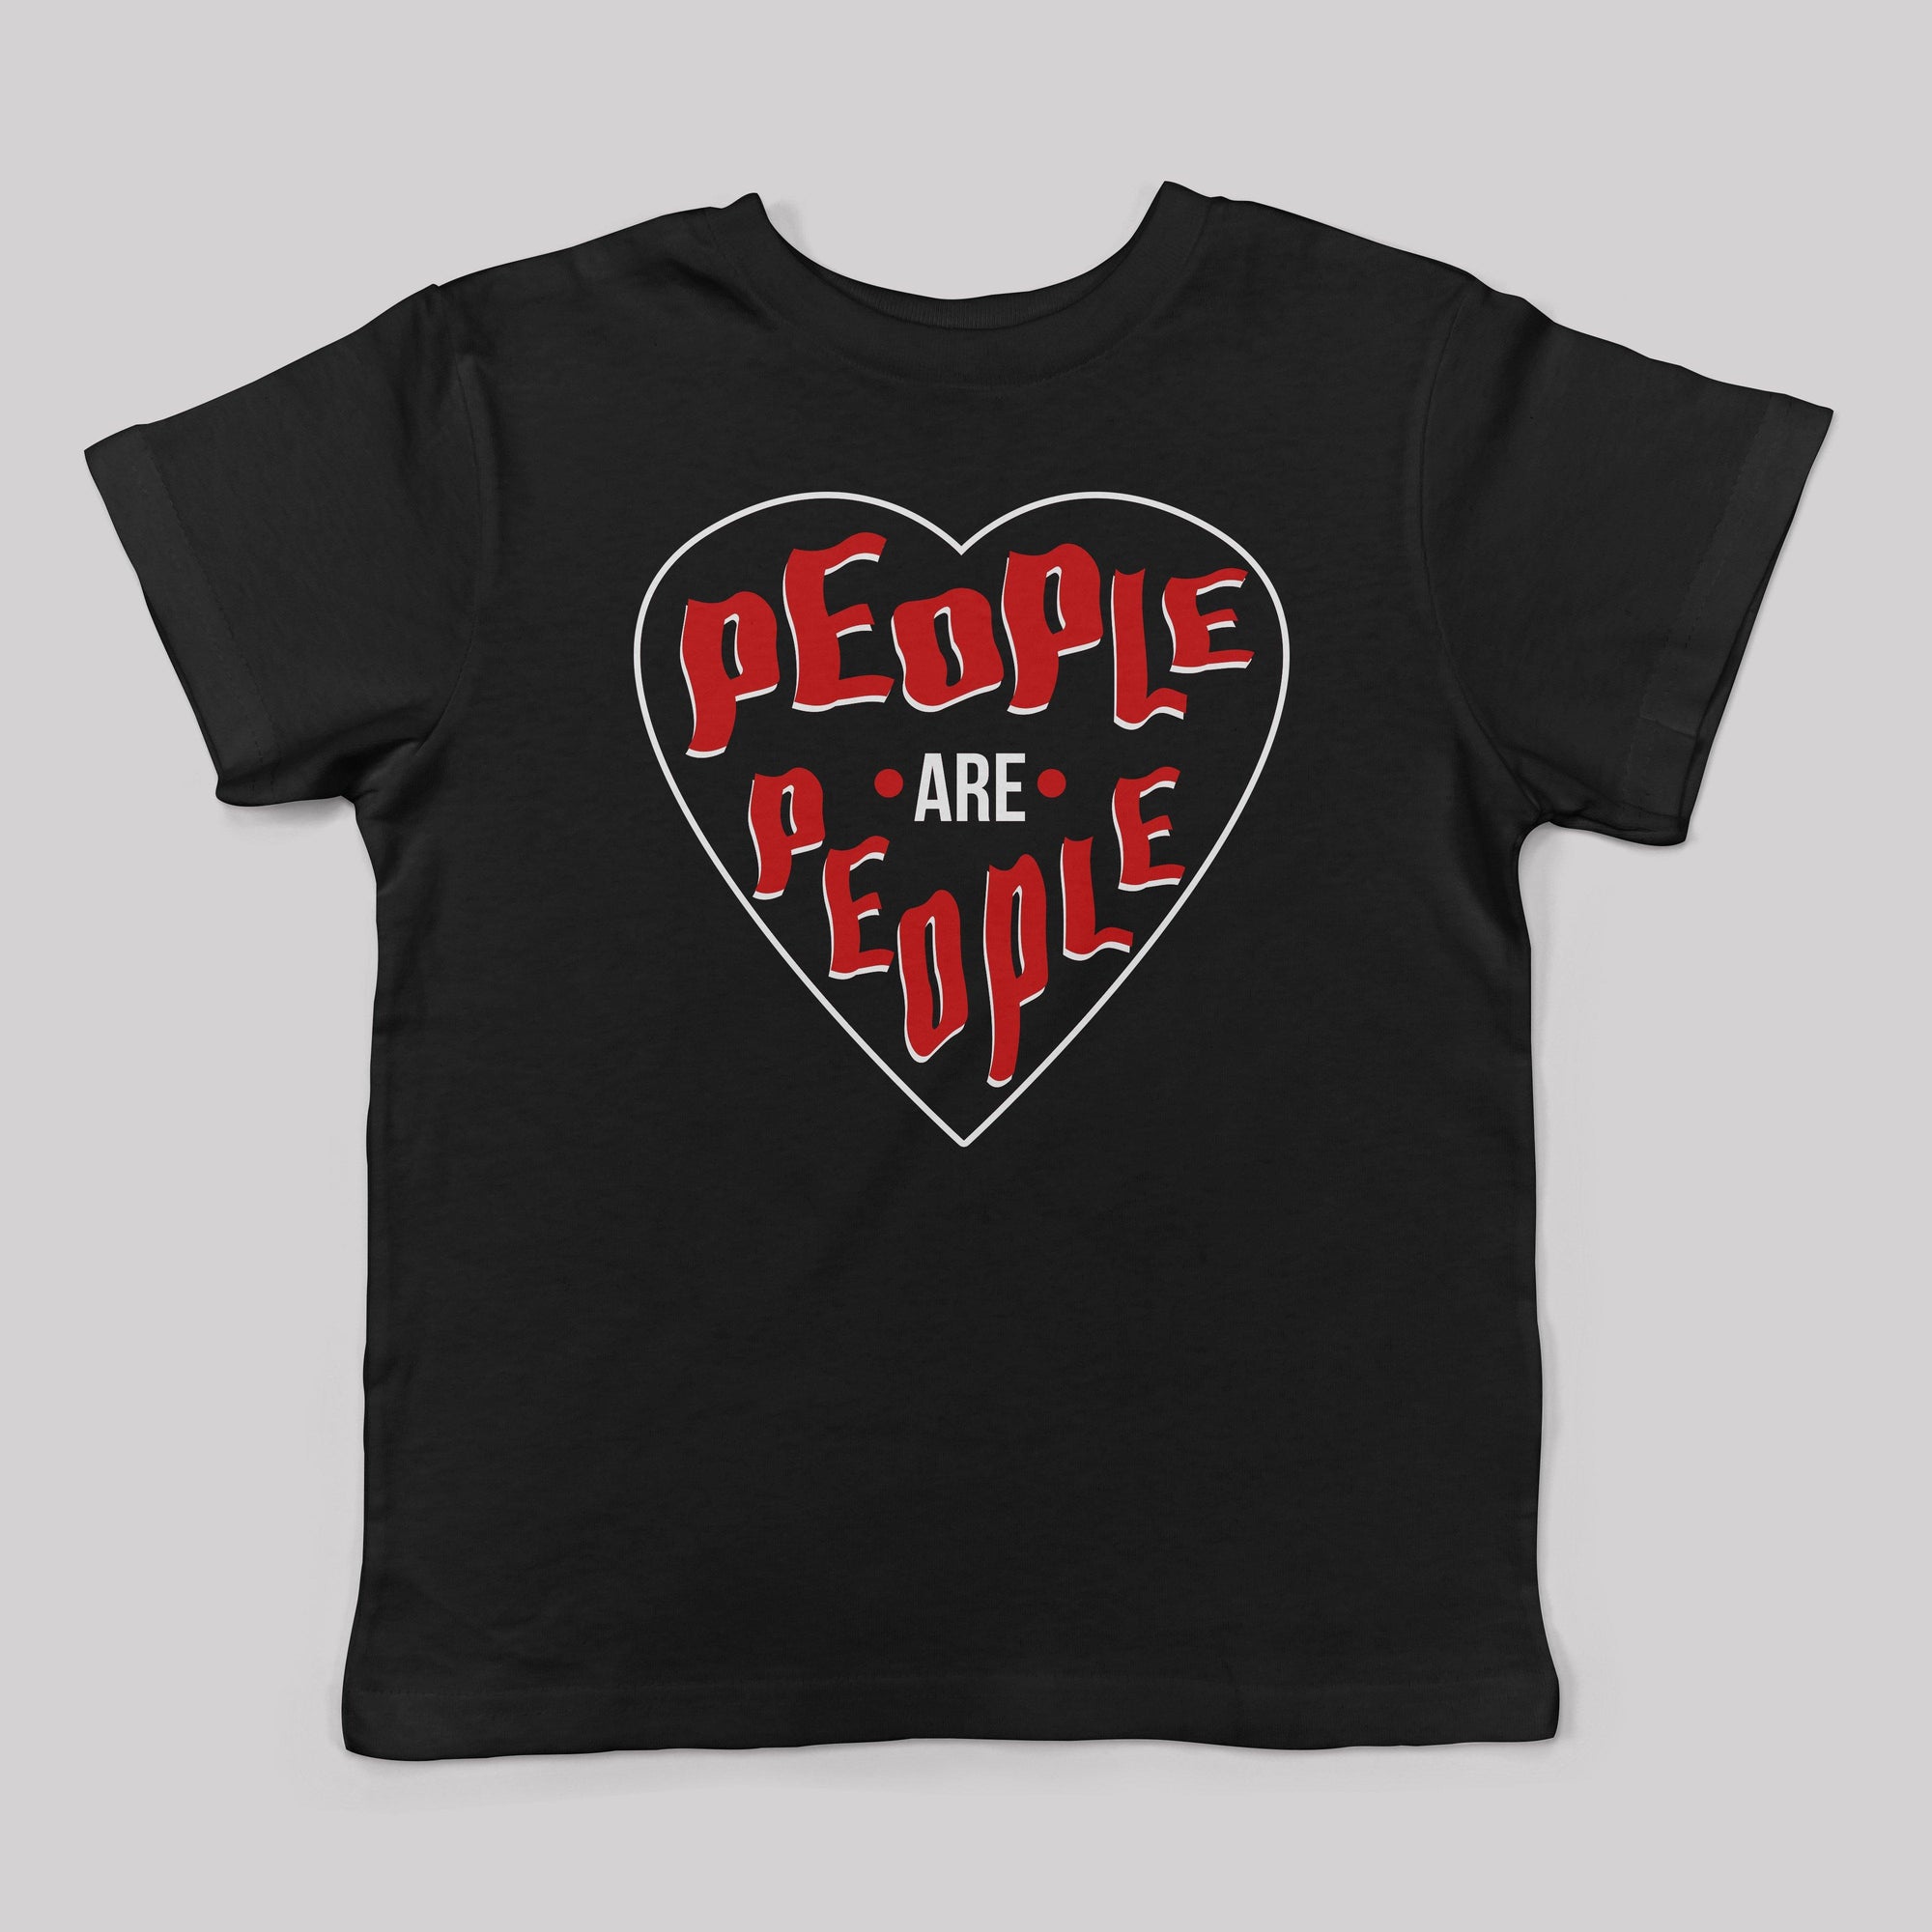 "People Are People" Tee for Kids - Baby Teith